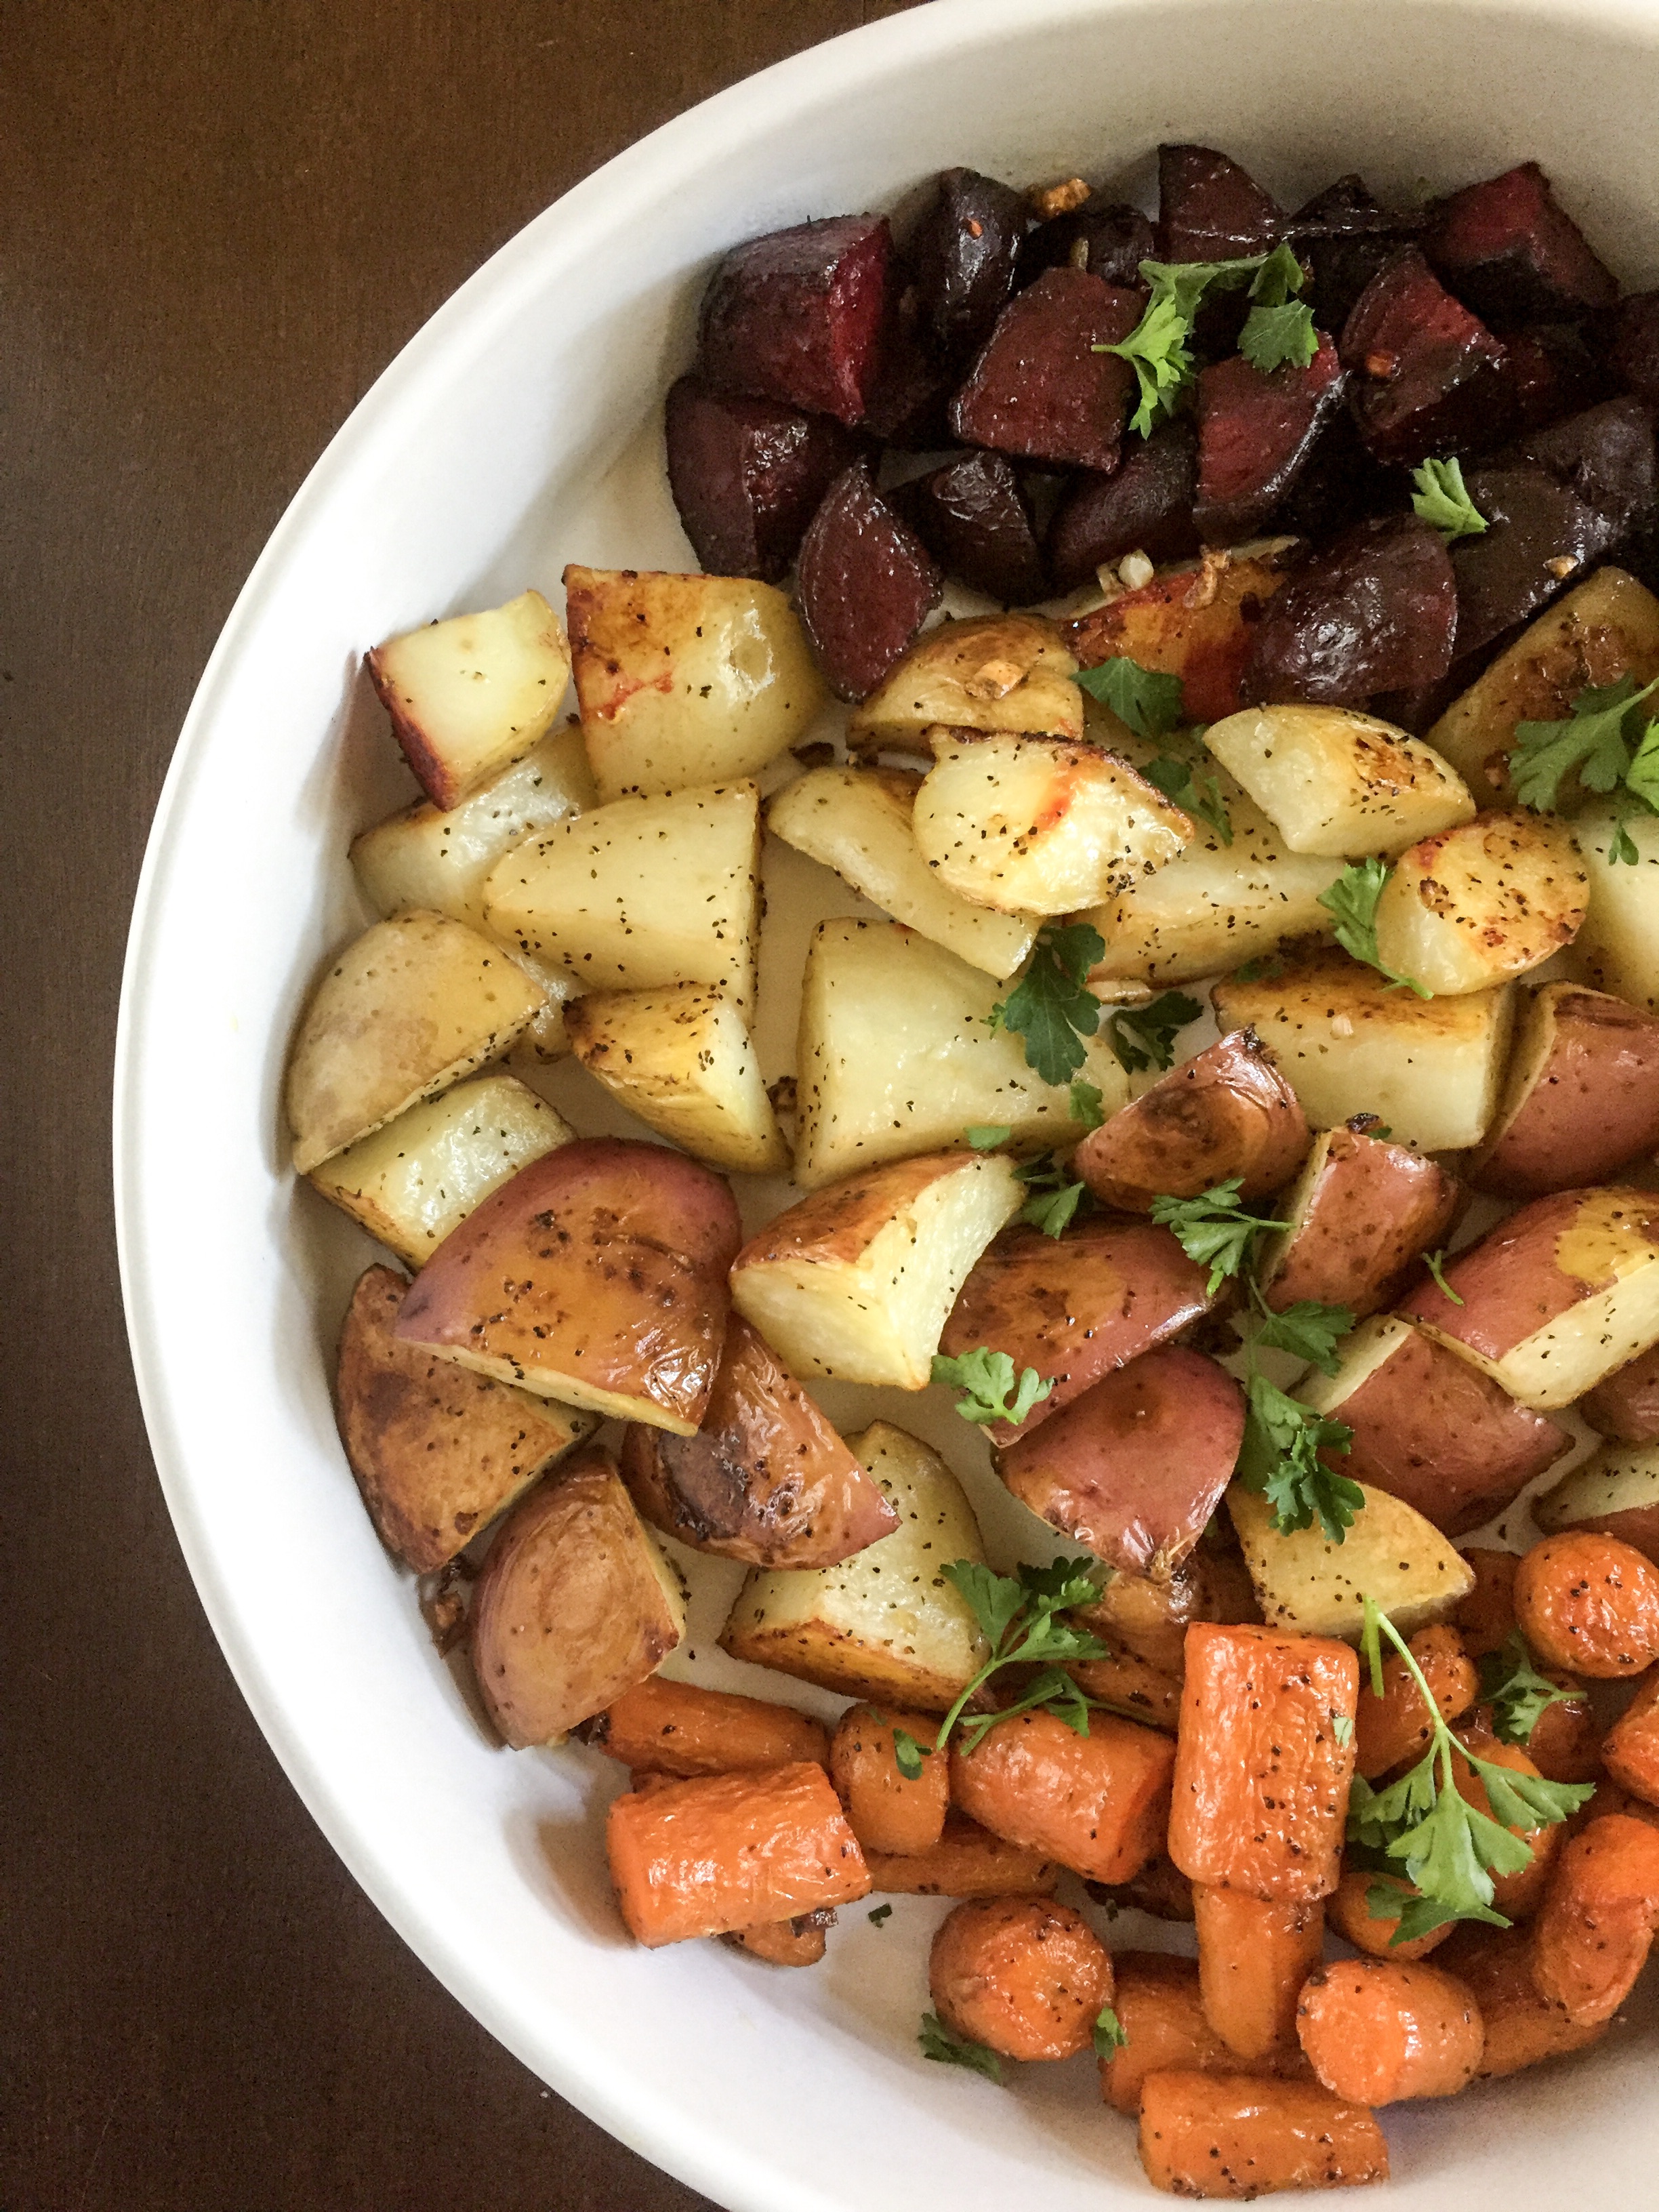 platter of colorful root vegetables garnished with parsley.